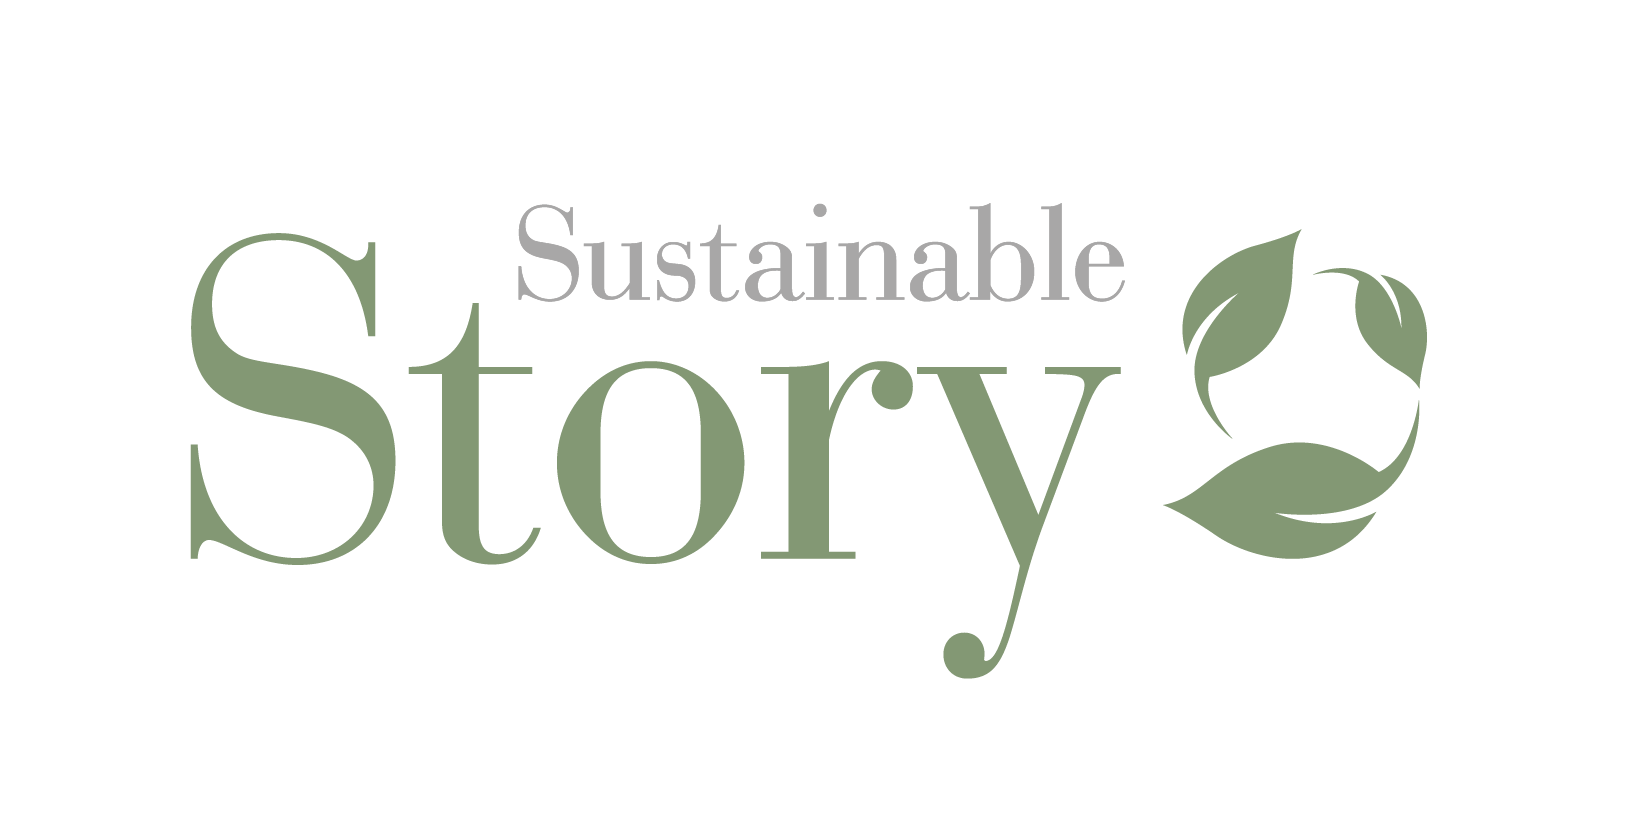 Our Sustainable Story Scheme